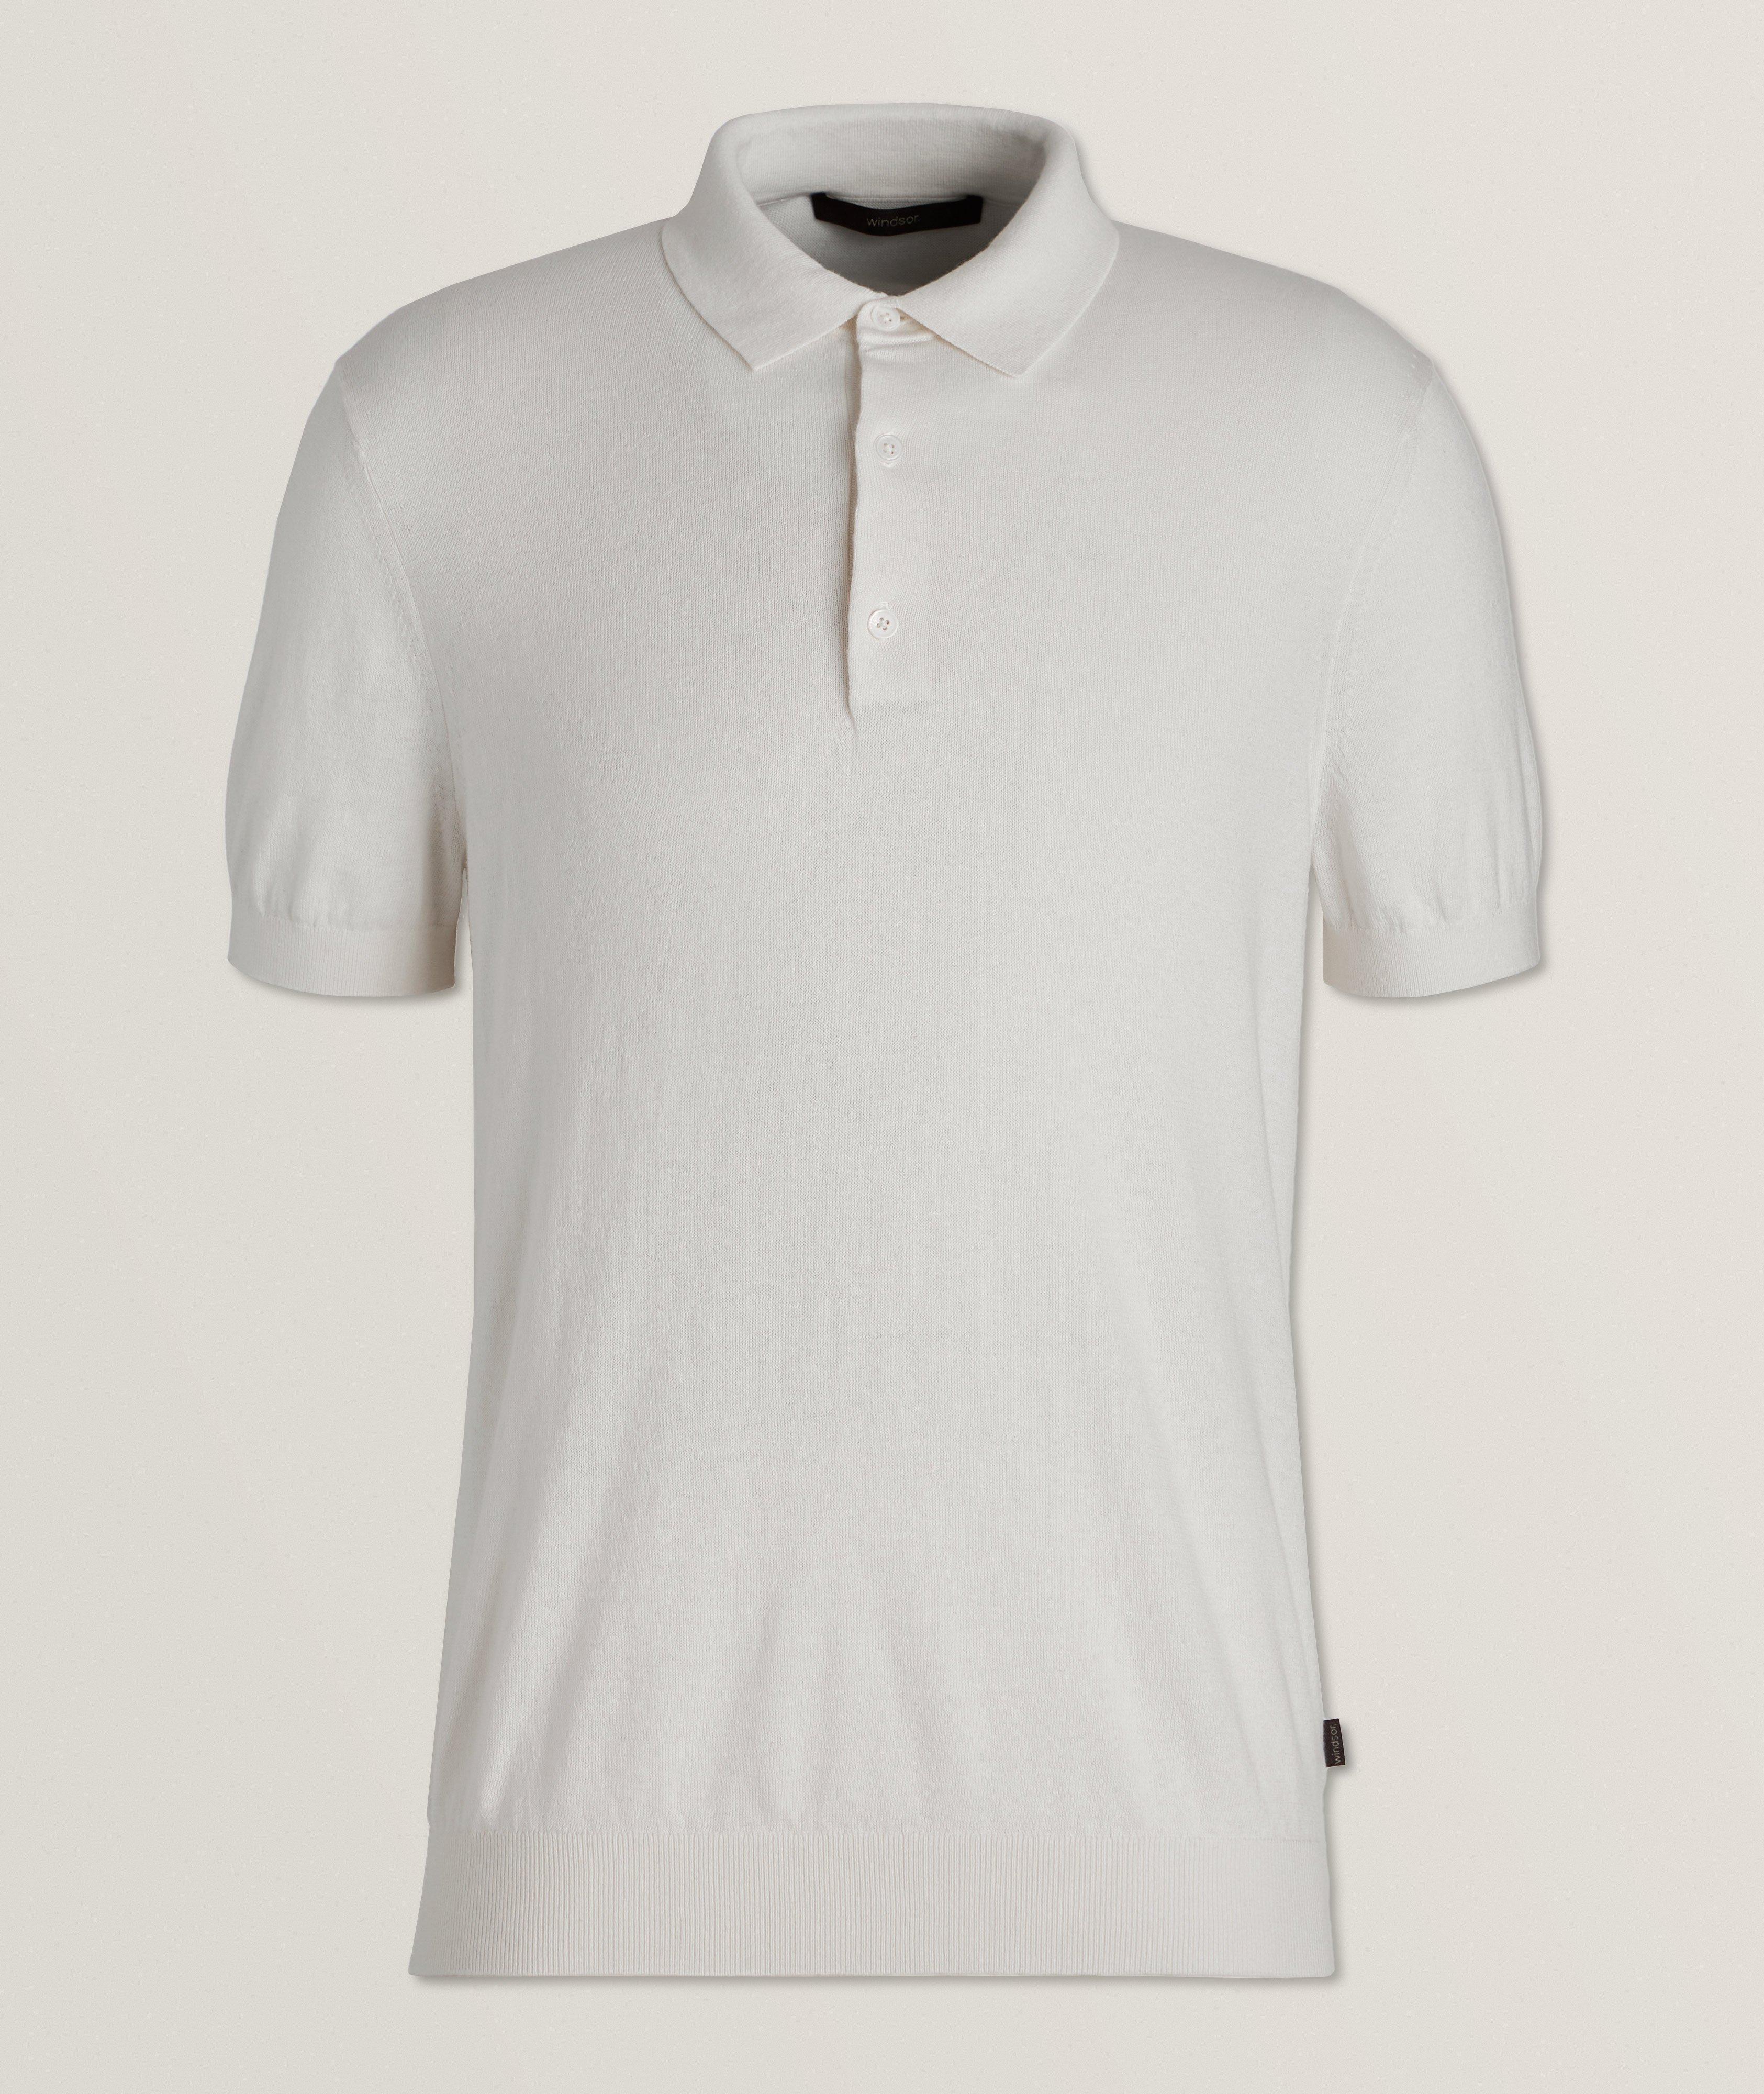 Cashmino Cashmere-Cotton Knitted Polo image 0